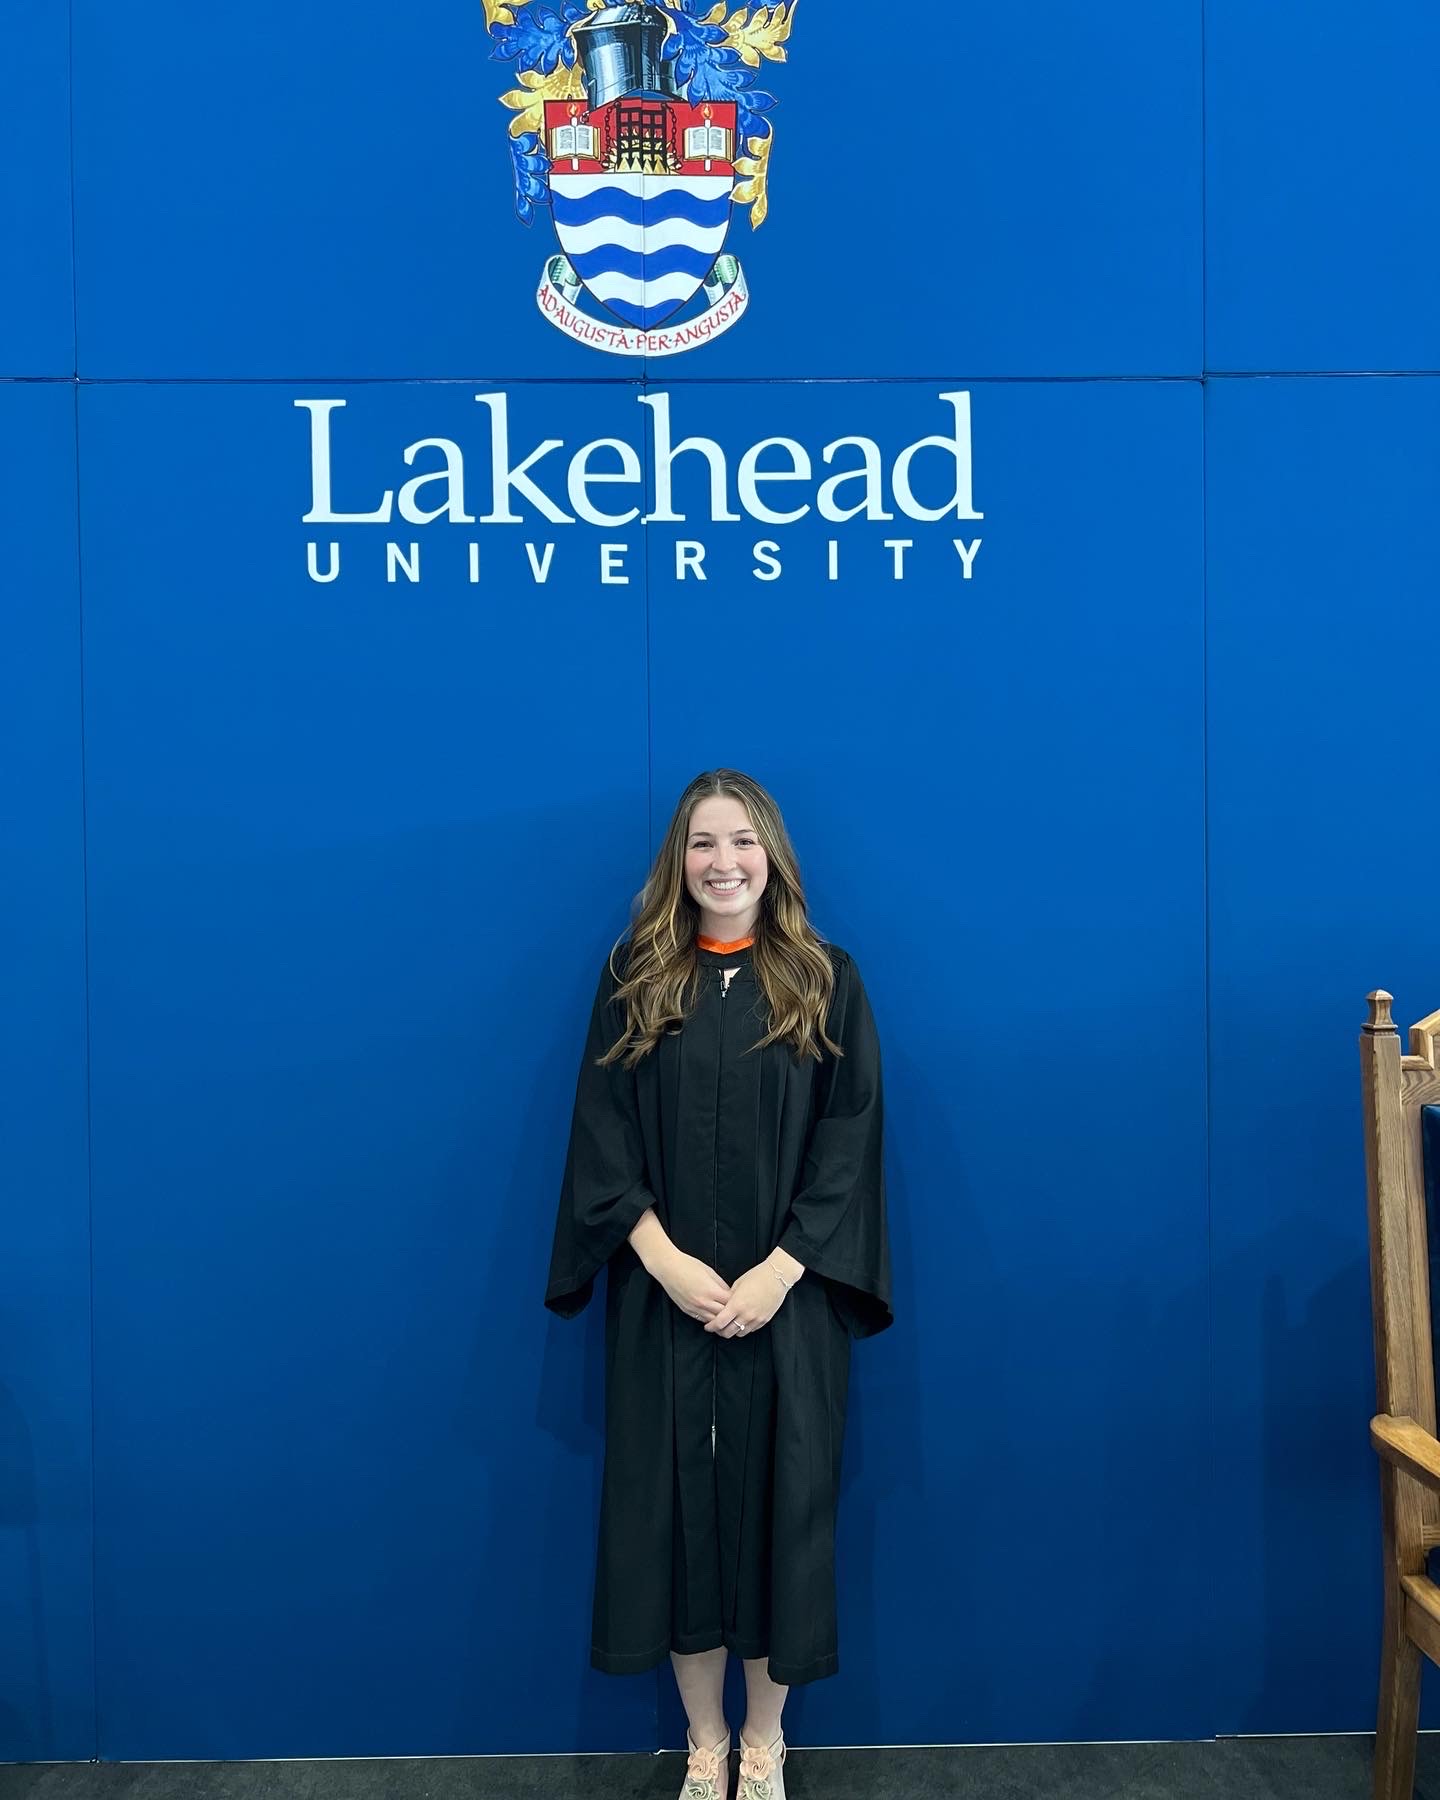 Lakehead student Avery Williams in her graduation robes standing in front of a Lakehead University screen with the school crest